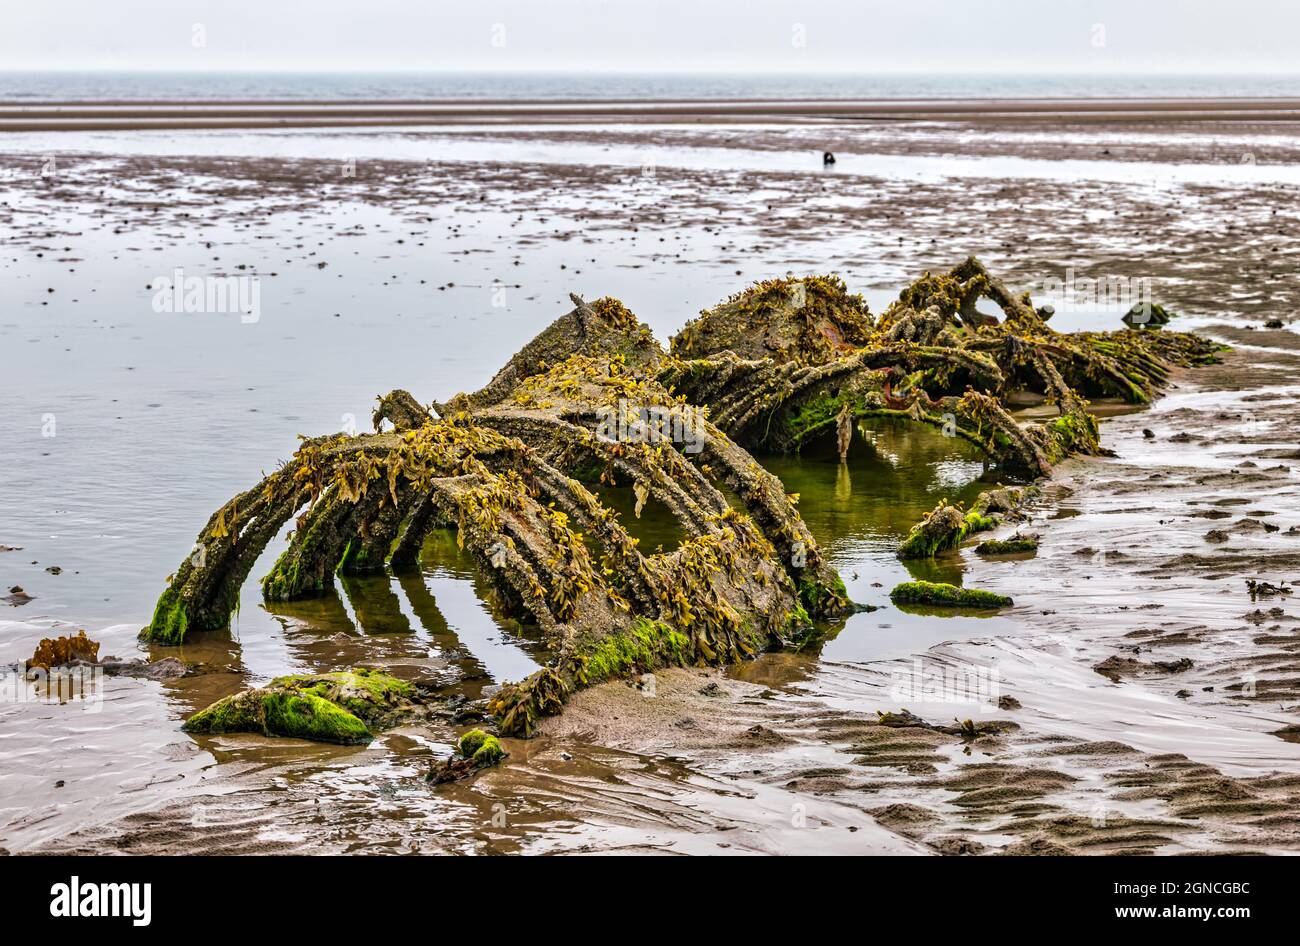 Decaying historic wreck of World War II XT class midget submarine buried in sand at low tide, Aberlady Bay, East Lothian, Scotland, UK Stock Photo